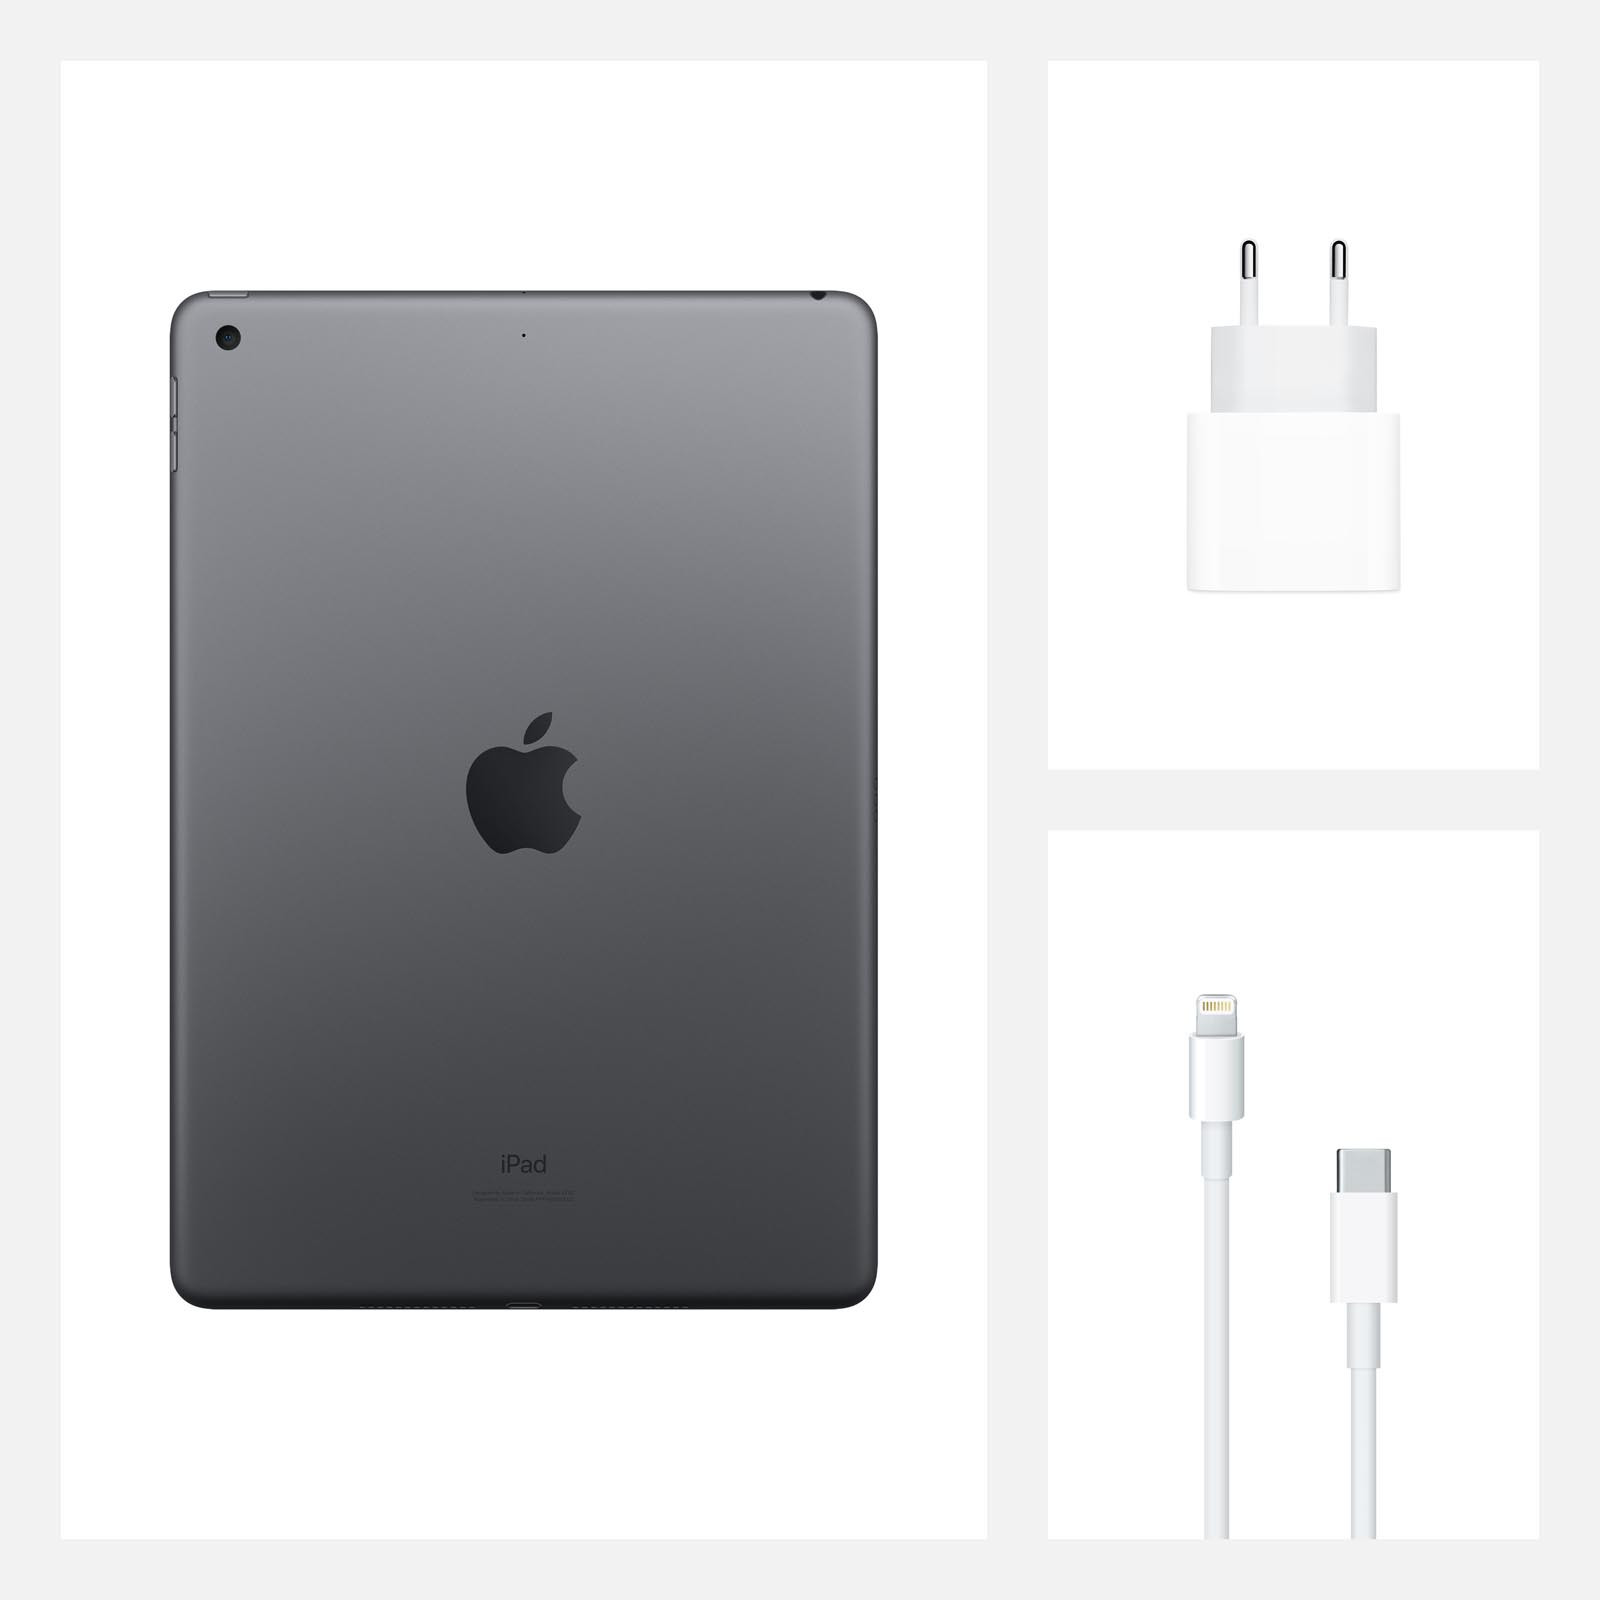 Refurbished iPad Air 3 64GB WiFi Gris sideral, Hors câble et chargeur